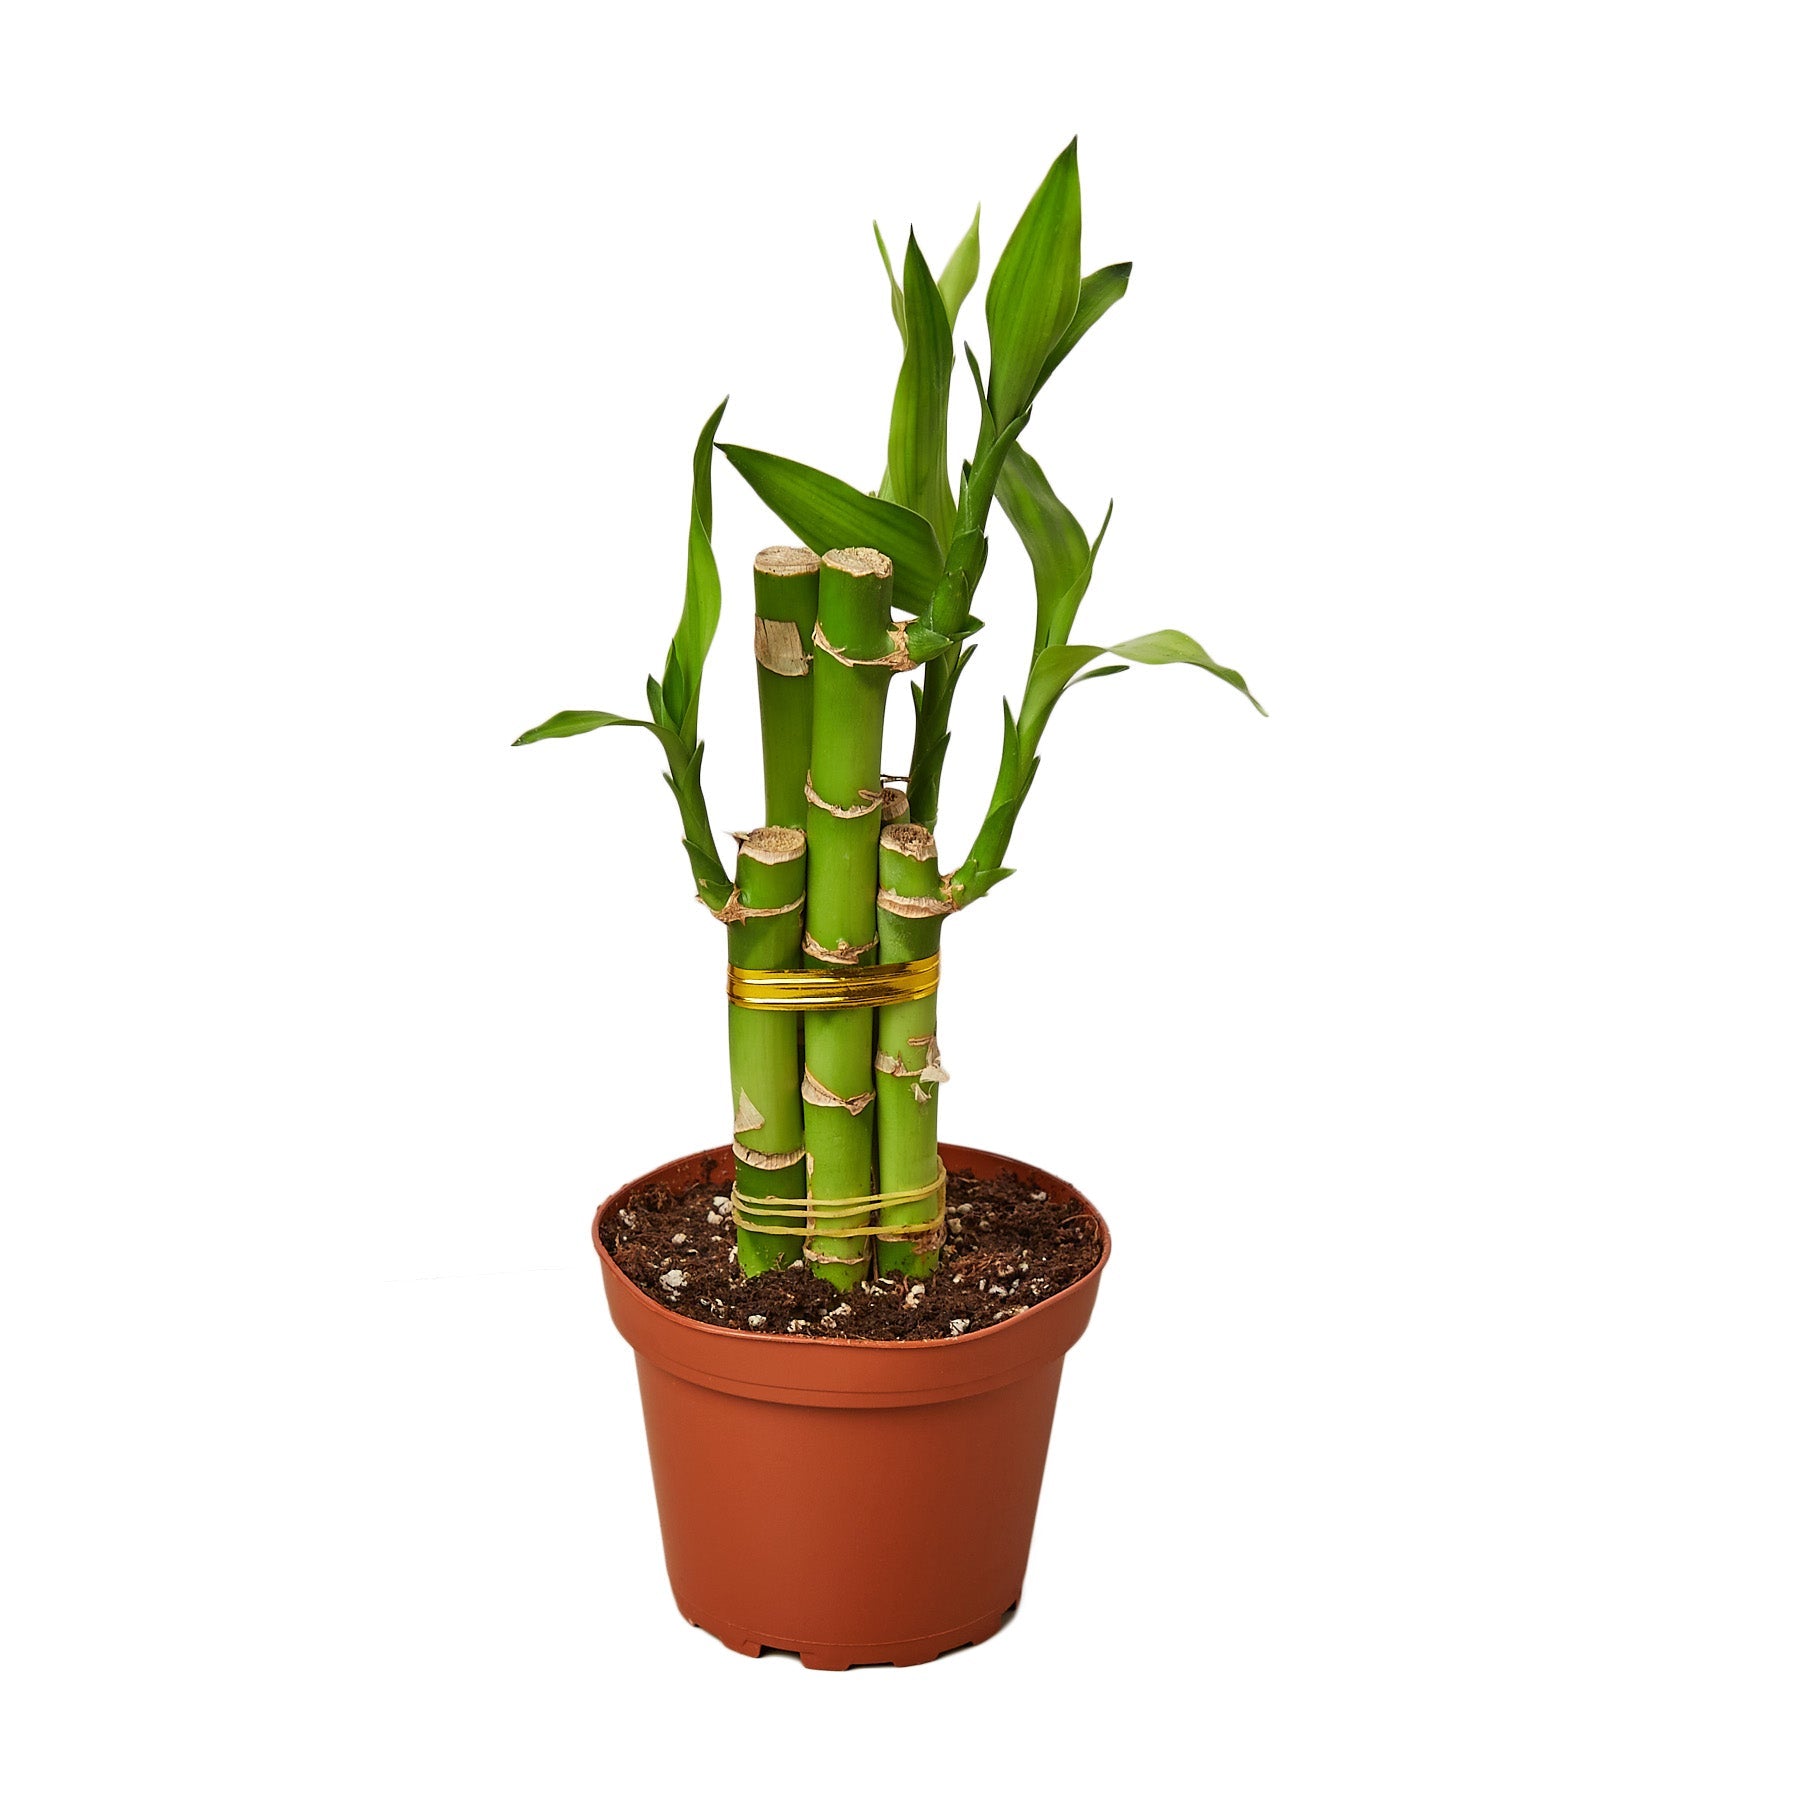 A bamboo plant in a pot on a white background, perfect for any top garden center near me.